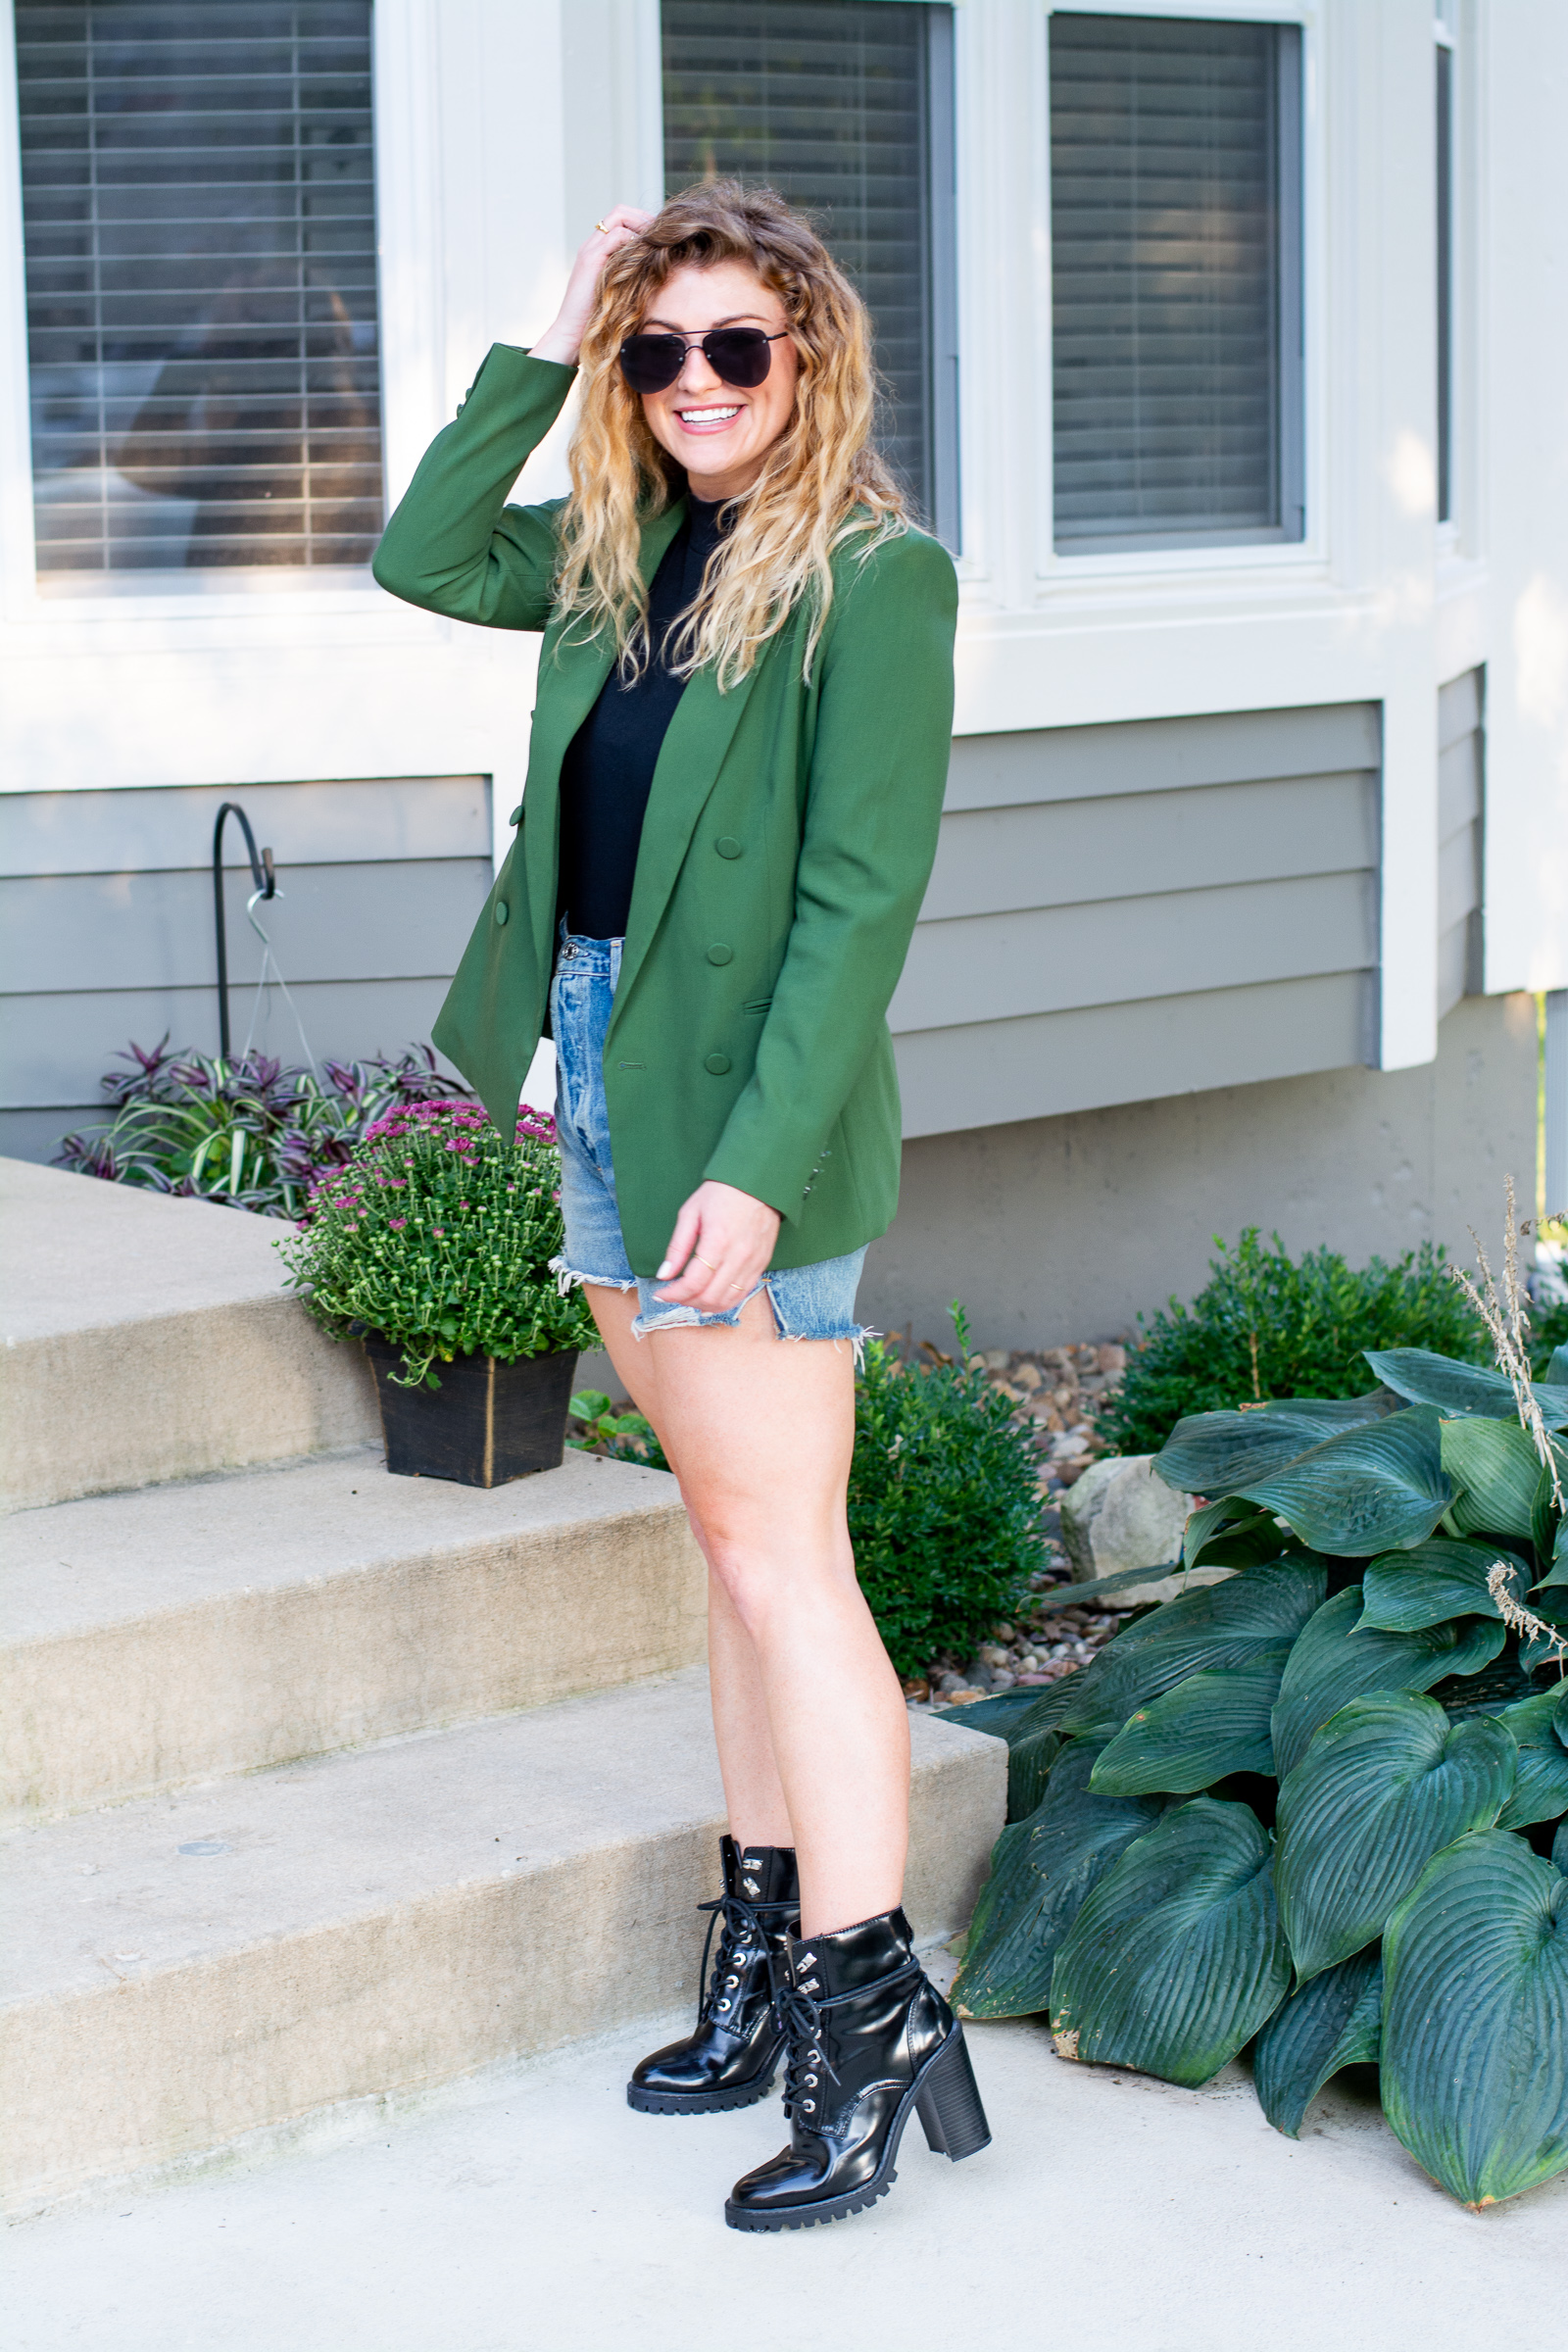 Green Blazer + Combat Boots for Early Fall. | LSR